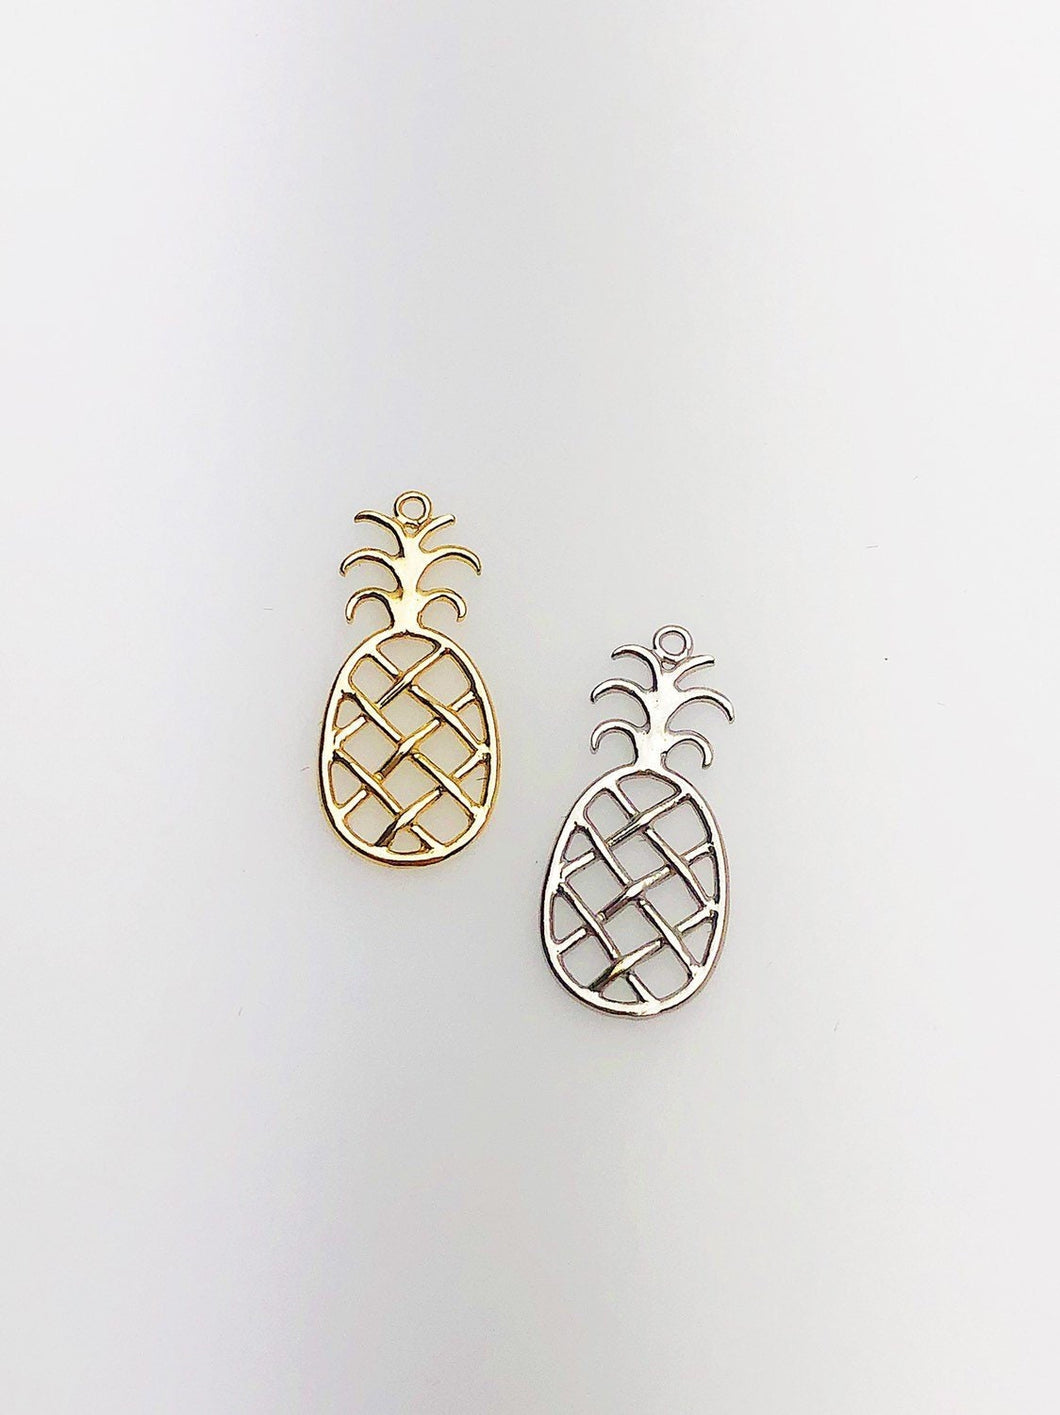 14K Solid Gold Pineapple Charm w/ Ring, 8.9x19.8mm, Made in USA (L-84)